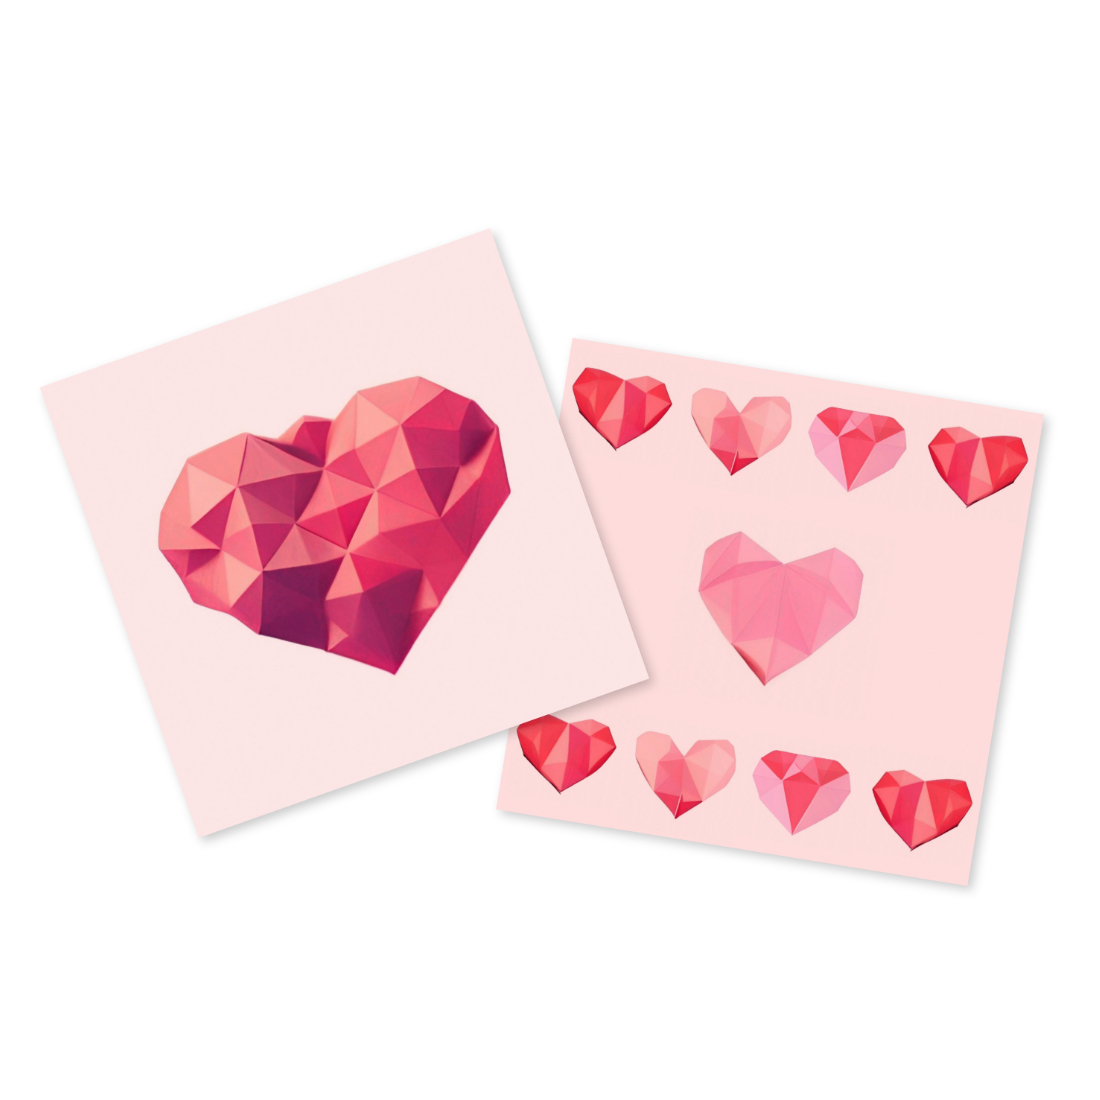 Perfect hearts for your postcard.